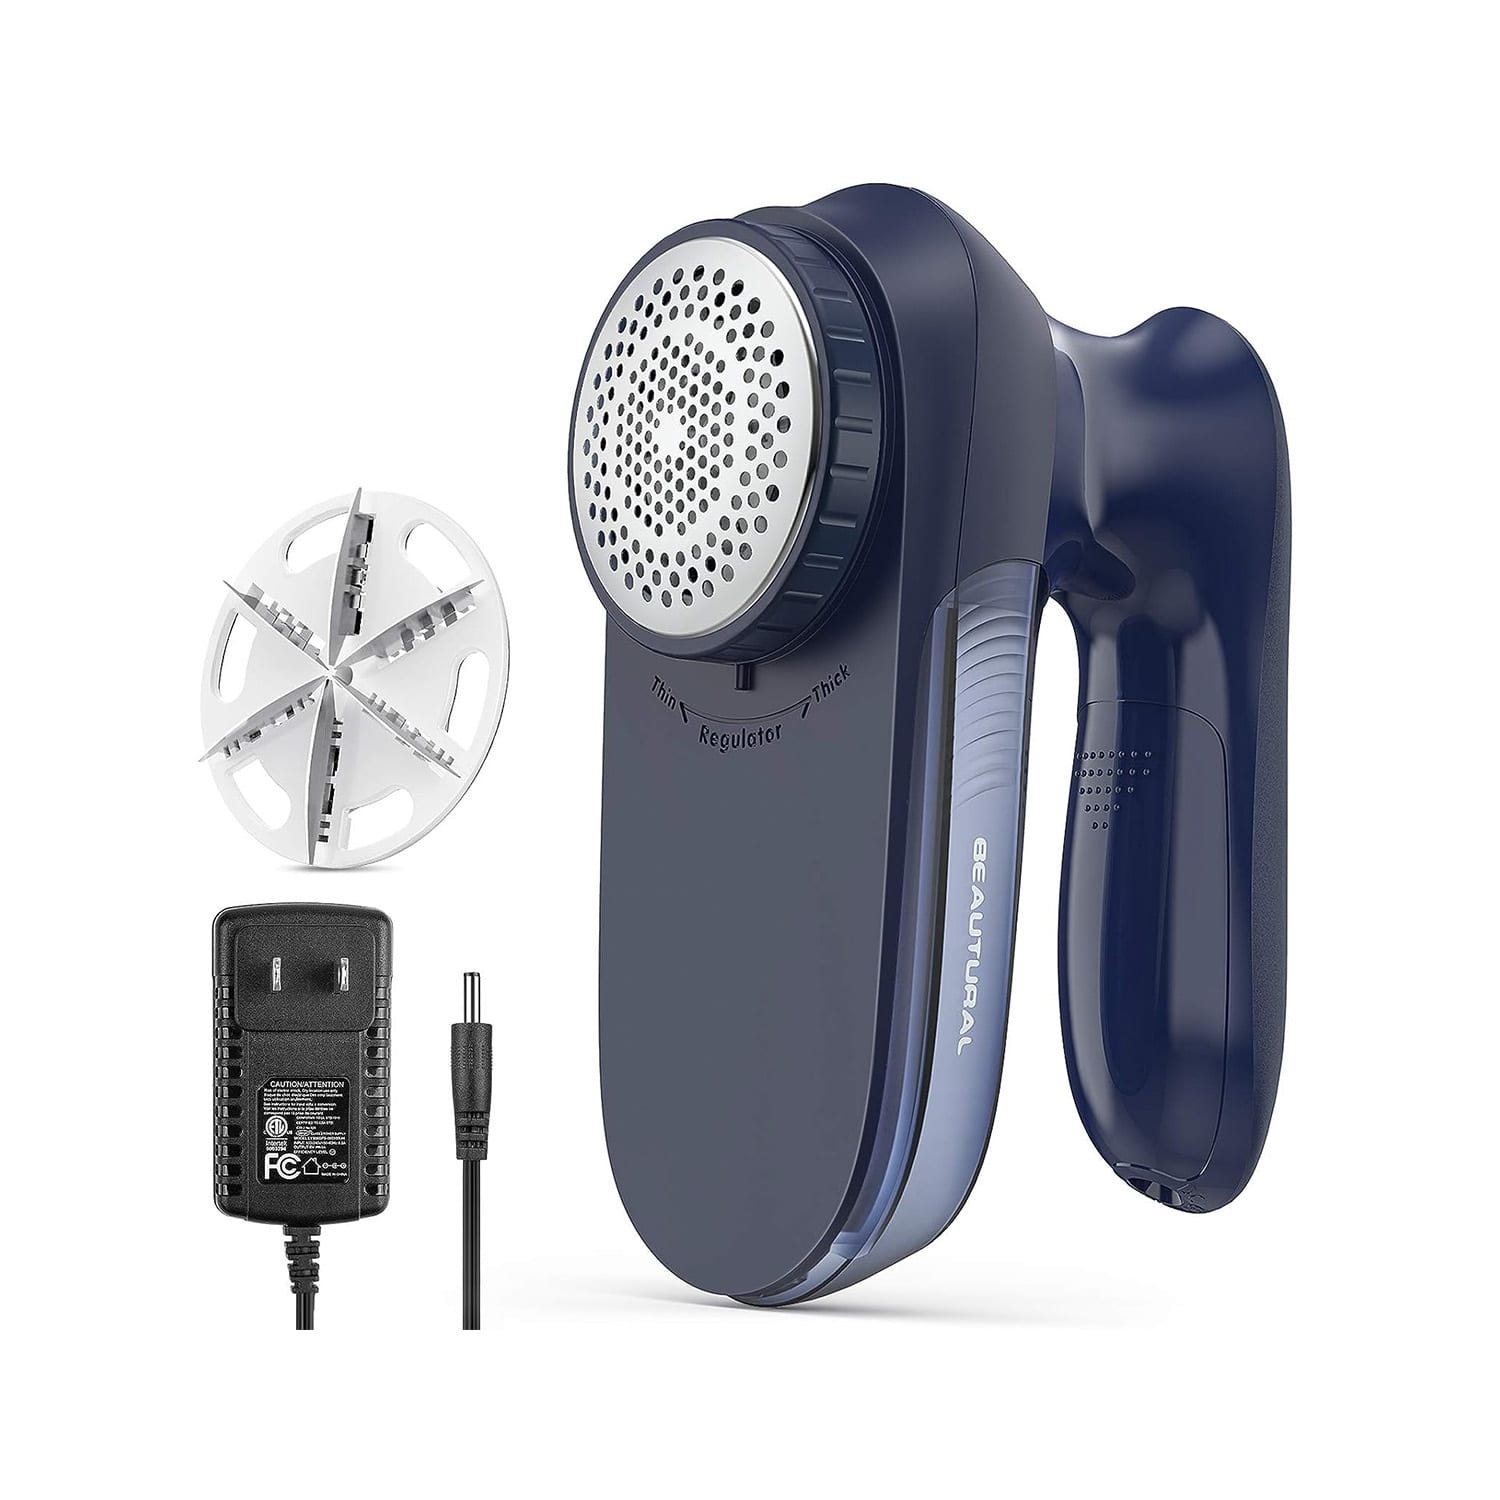 10 of the Best Fabric Shaver Devices to Get Rid of Piling in 2023